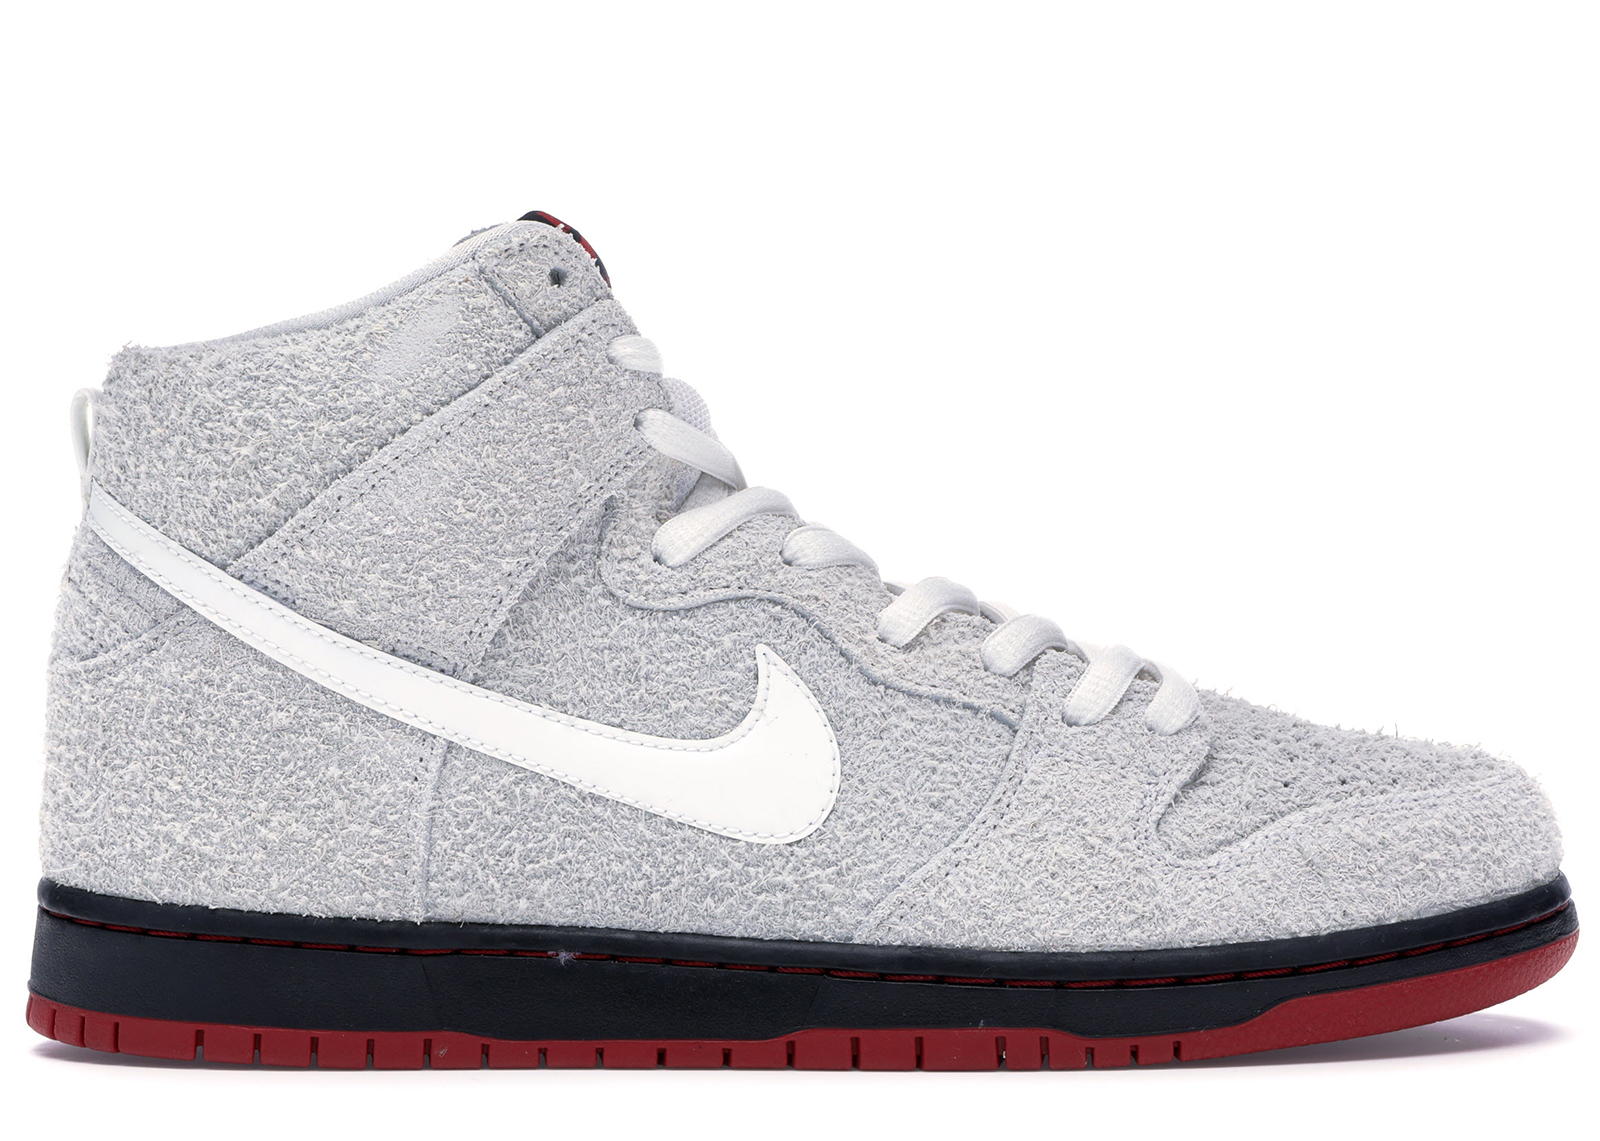 Nike Dunk SB High Wolf In Sheep's Clothing - 881758-110